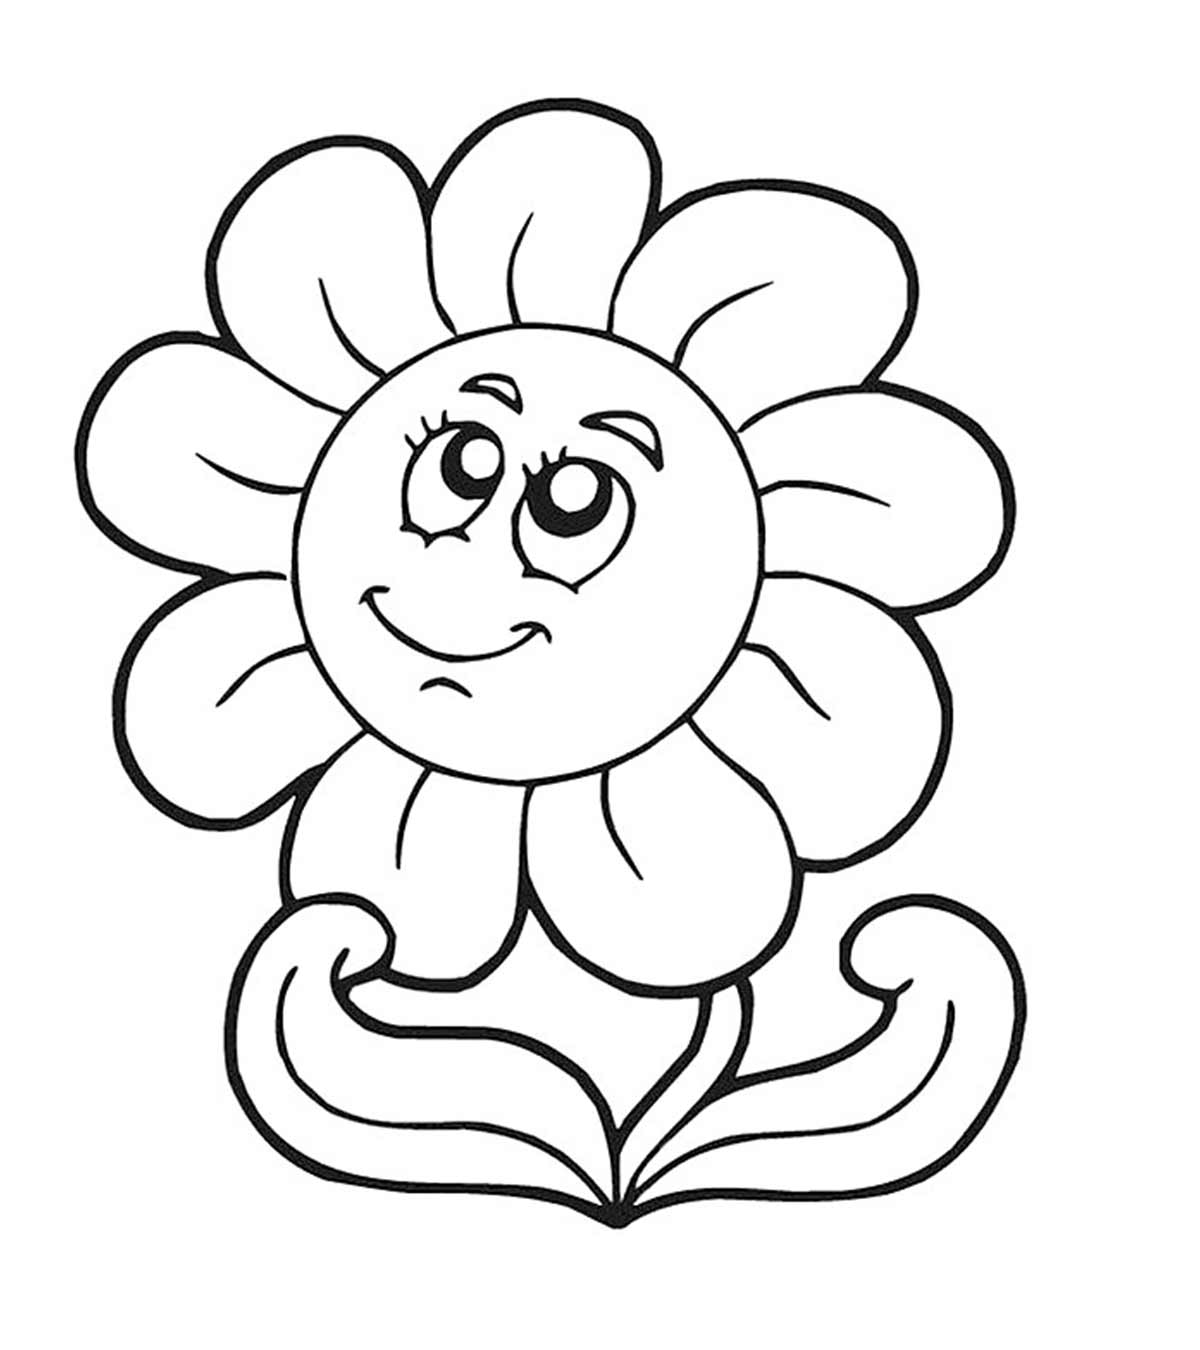 Flowers Coloring Pages - MomJunction